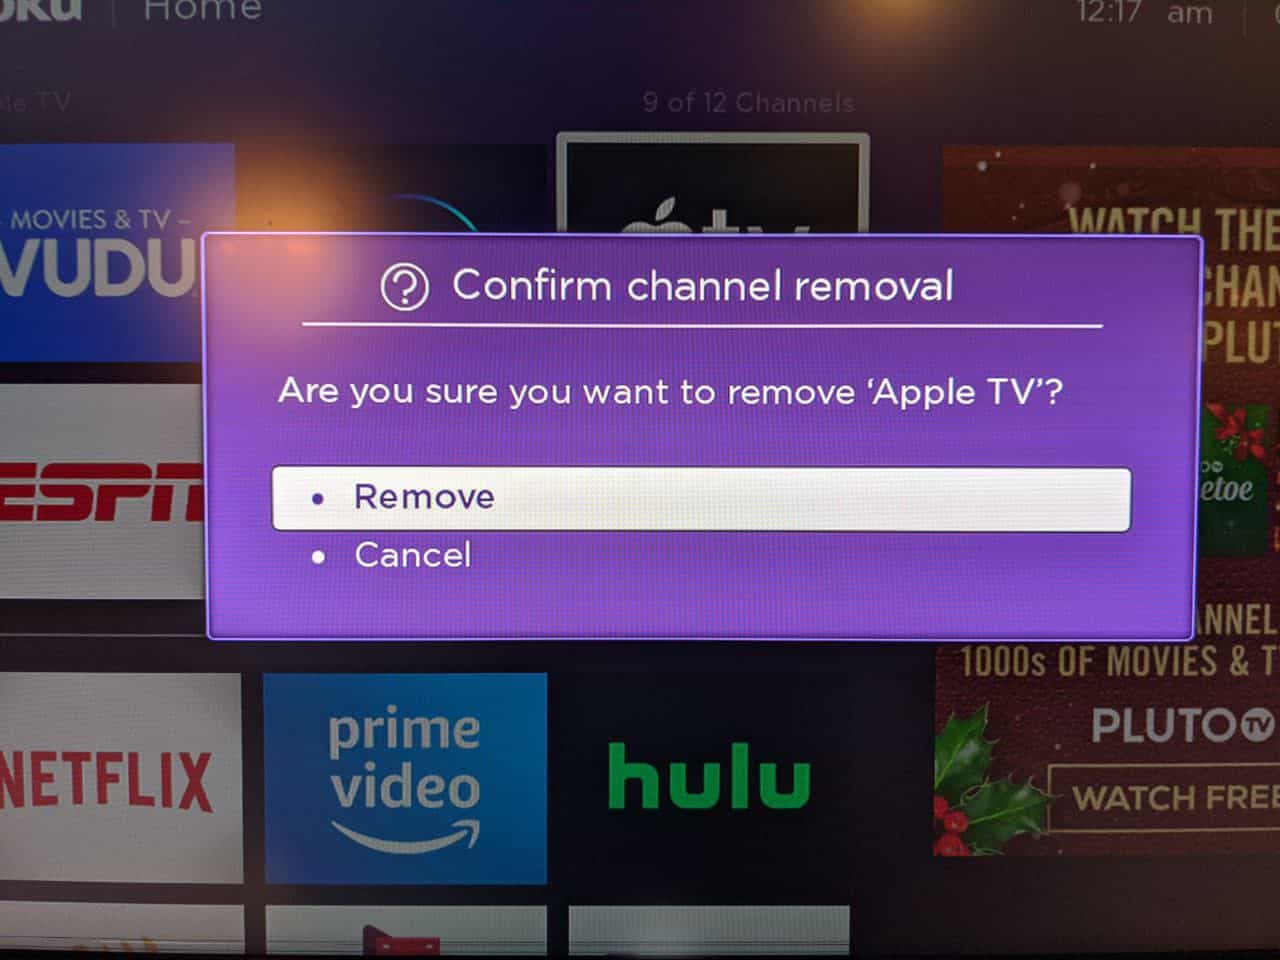 remove mirror for roku from mac